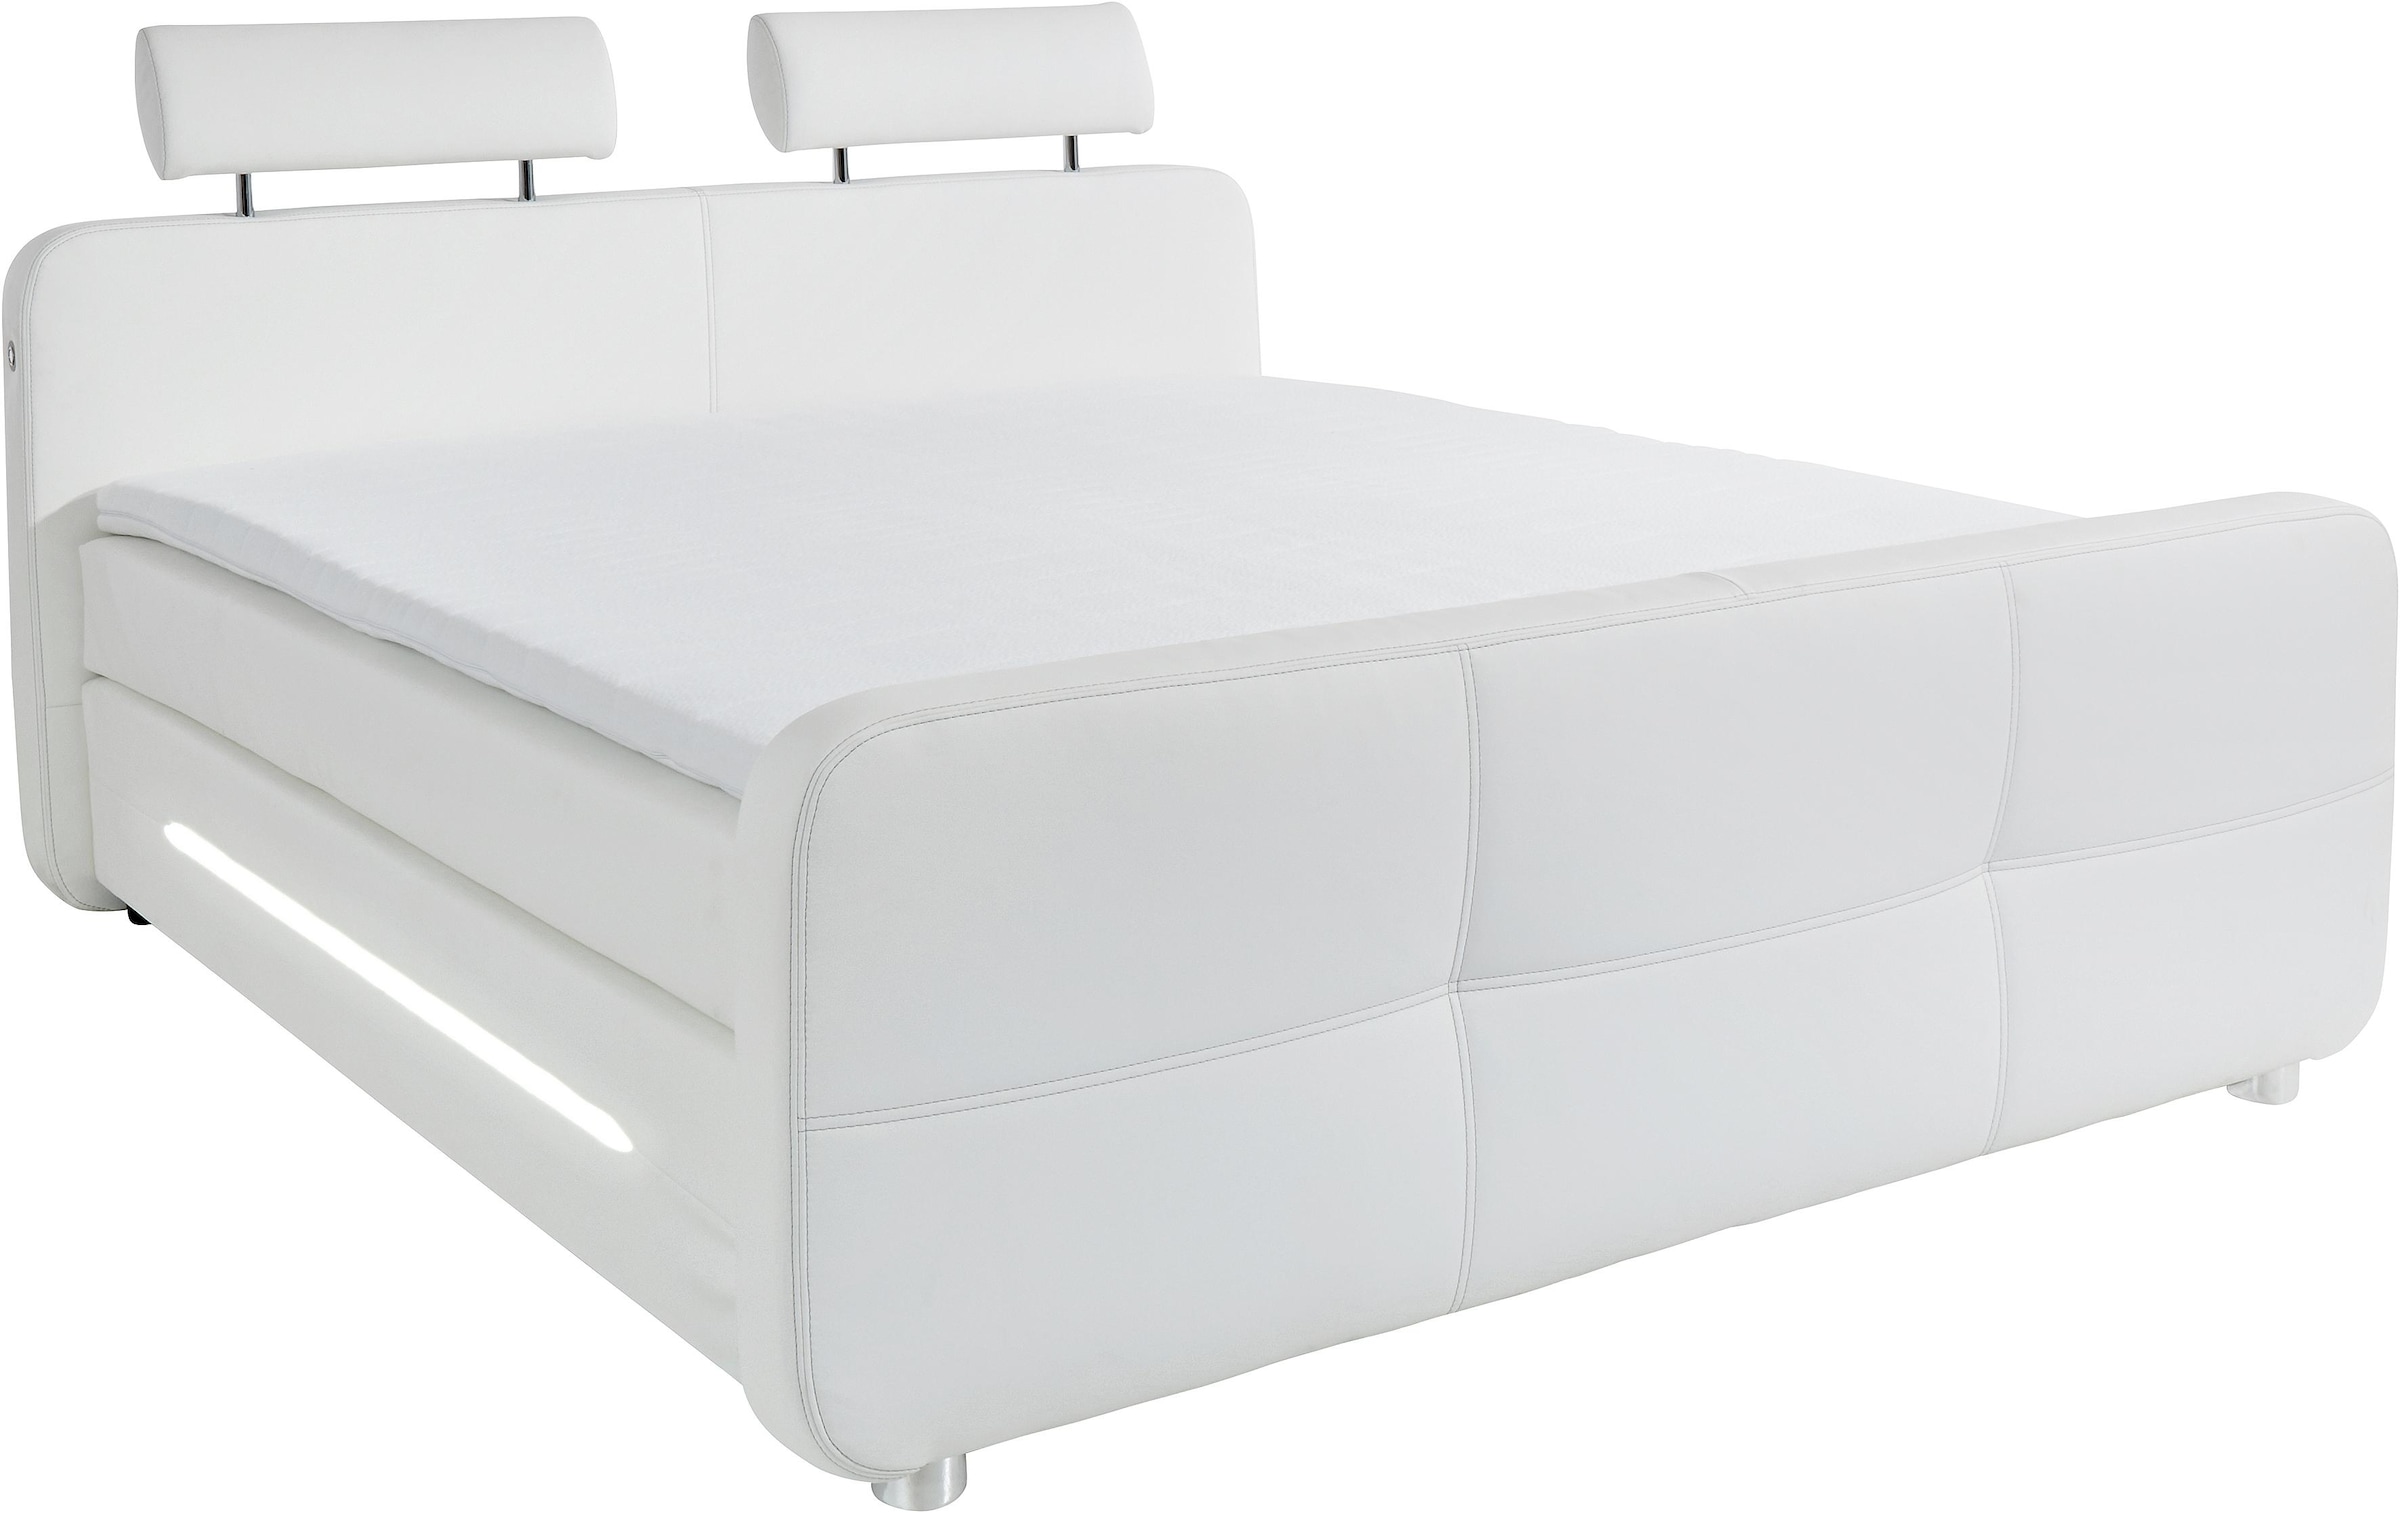 Places of Style Boxspringbett Gina, inkl. Topper und LED-Beleuchtung